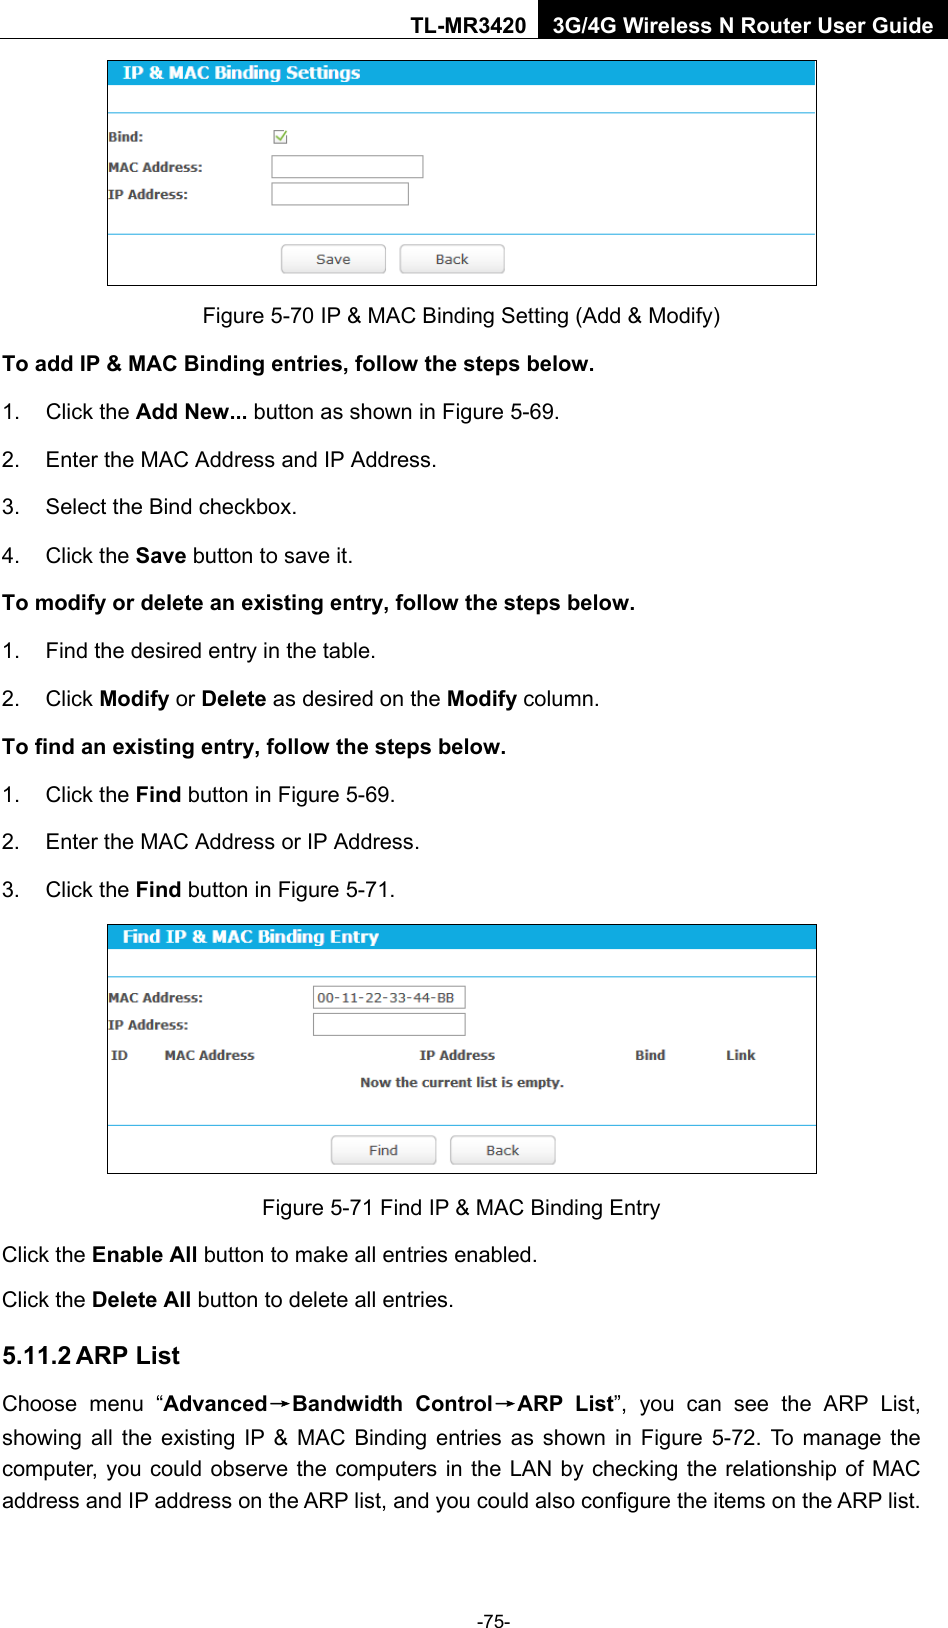    -75- TL-MR3420 3G/4G Wireless N Router User Guide  Figure 5-70 IP &amp; MAC Binding Setting (Add &amp; Modify) To add IP &amp; MAC Binding entries, follow the steps below. 1. Click the Add New... button as shown in Figure 5-69.   2. Enter the MAC Address and IP Address. 3. Select the Bind checkbox.   4. Click the Save button to save it. To modify or delete an existing entry, follow the steps below. 1. Find the desired entry in the table.   2. Click Modify or Delete as desired on the Modify column.   To find an existing entry, follow the steps below. 1. Click the Find button in Figure 5-69. 2. Enter the MAC Address or IP Address. 3. Click the Find button in Figure 5-71.  Figure 5-71 Find IP &amp; MAC Binding Entry Click the Enable All button to make all entries enabled. Click the Delete All button to delete all entries. 5.11.2 ARP List Choose menu “Advanced→Bandwidth Control→ARP  List”,  you can see the ARP List, showing all the existing IP &amp; MAC Binding entries as shown in Figure  5-72.  To manage the computer, you could observe the computers in the LAN by checking the relationship of MAC address and IP address on the ARP list, and you could also configure the items on the ARP list.   